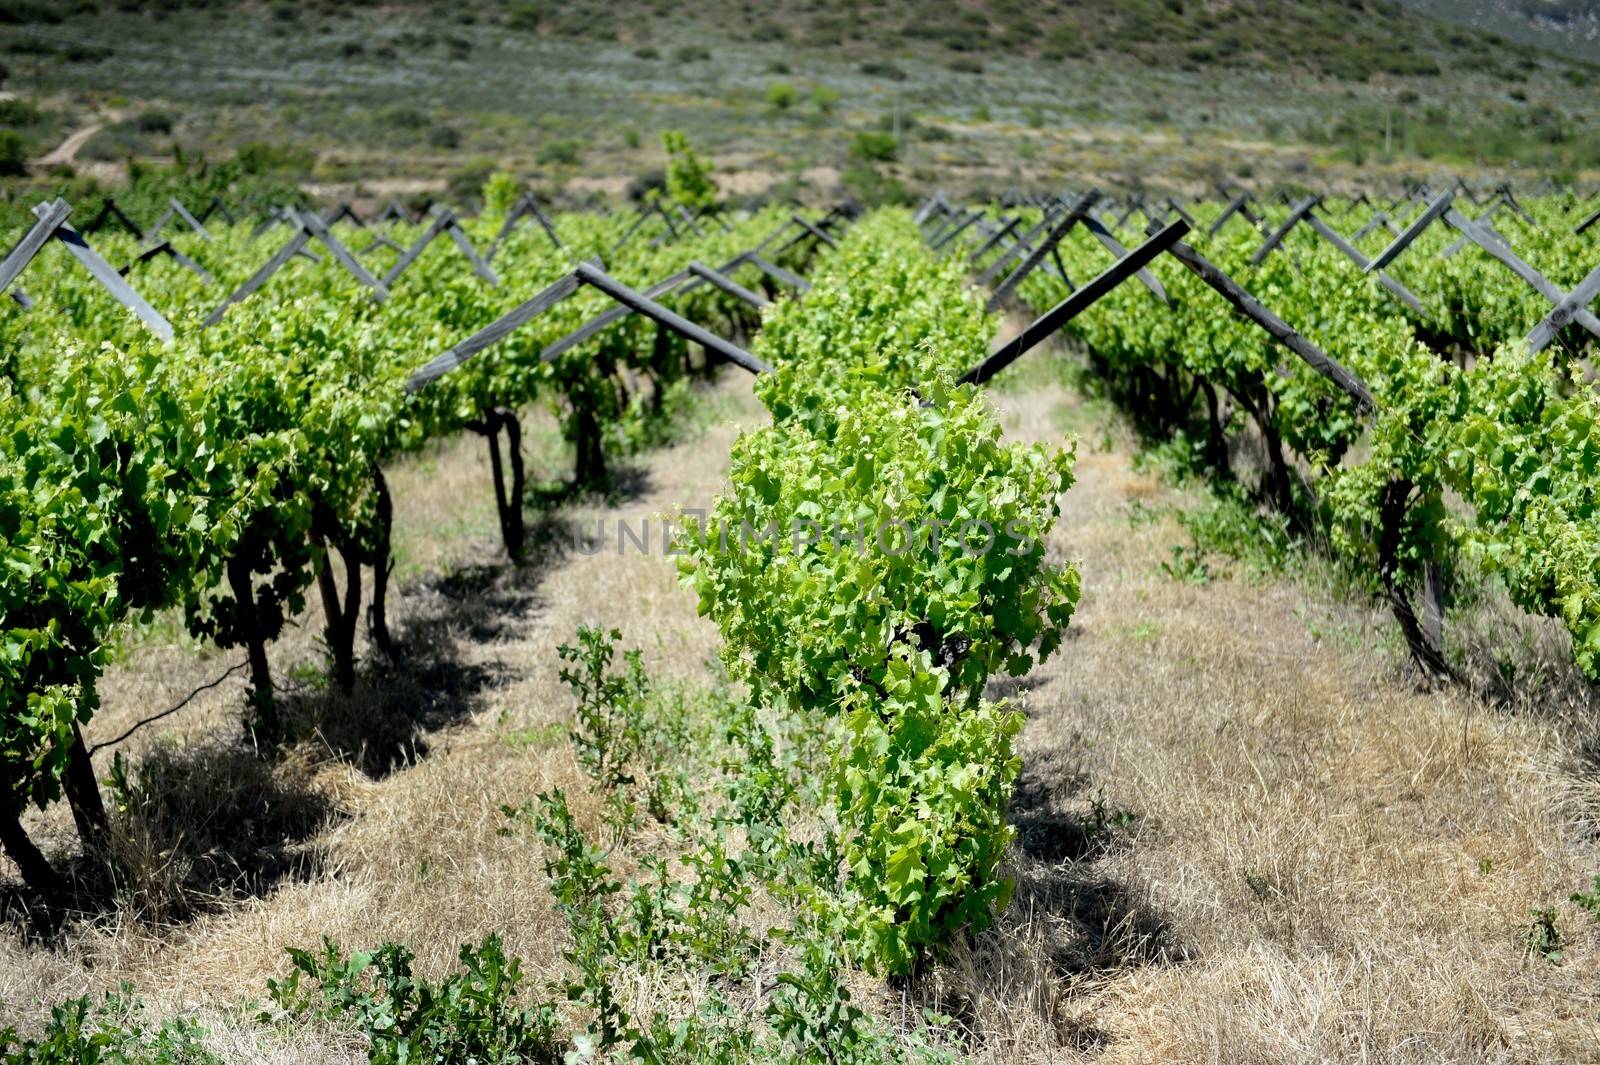 A scenic shot of the vineyards in the Montagu Mountain Range